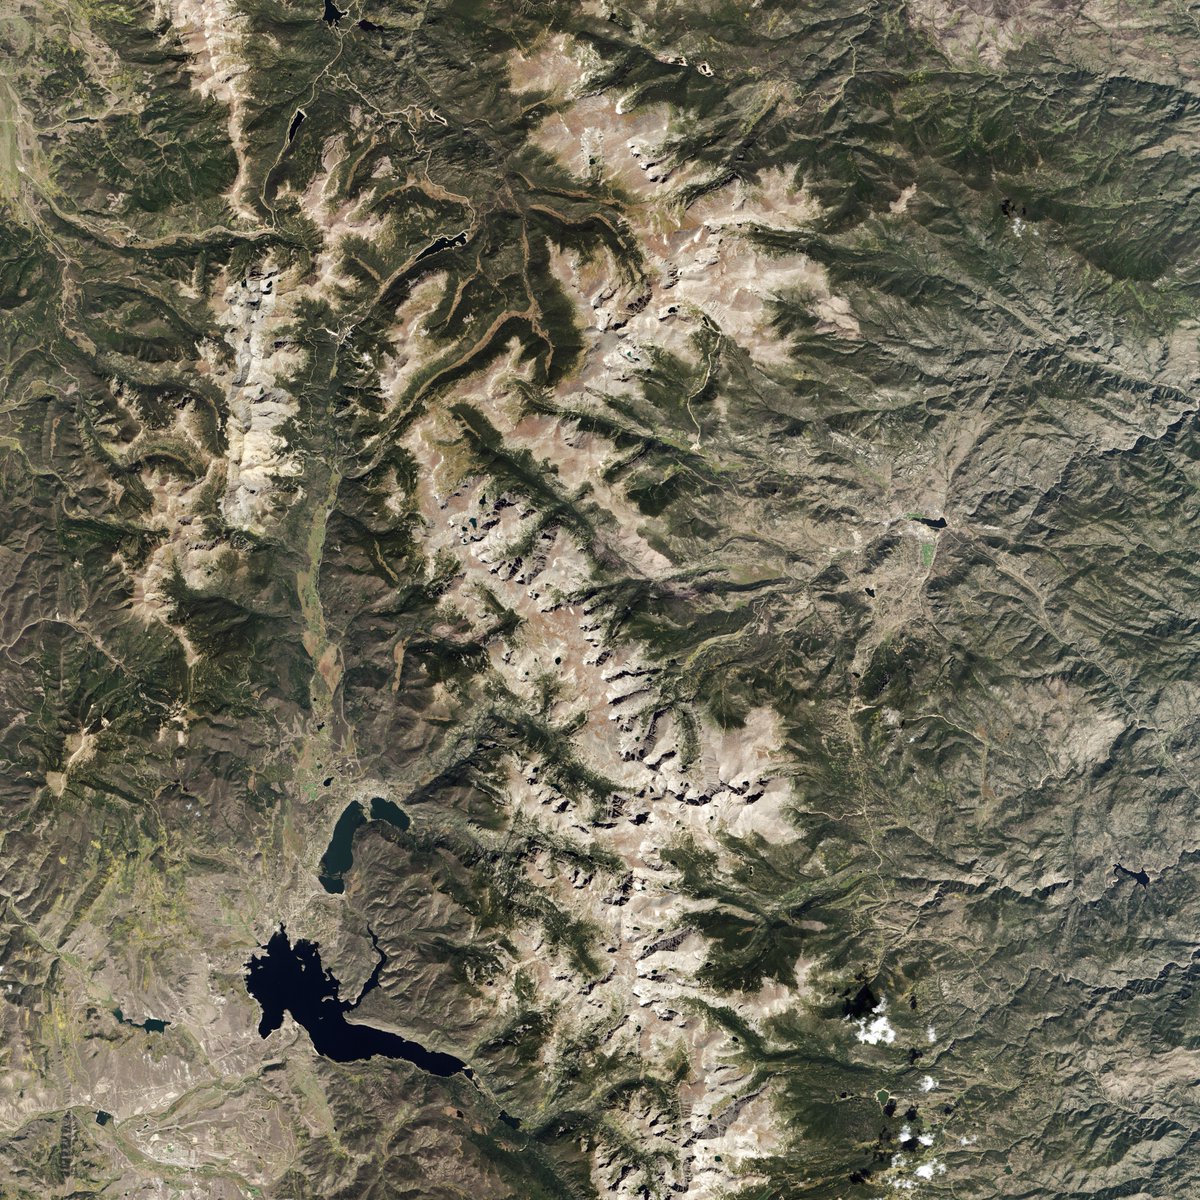 Feb. 2013  We launched  @NASA_Landsat 8 in partnership with  @USGS to continue global land observations. Seen here is Colorado’s Rocky Mountain National Park captured by Landsat 8 in Sept. 2014. 